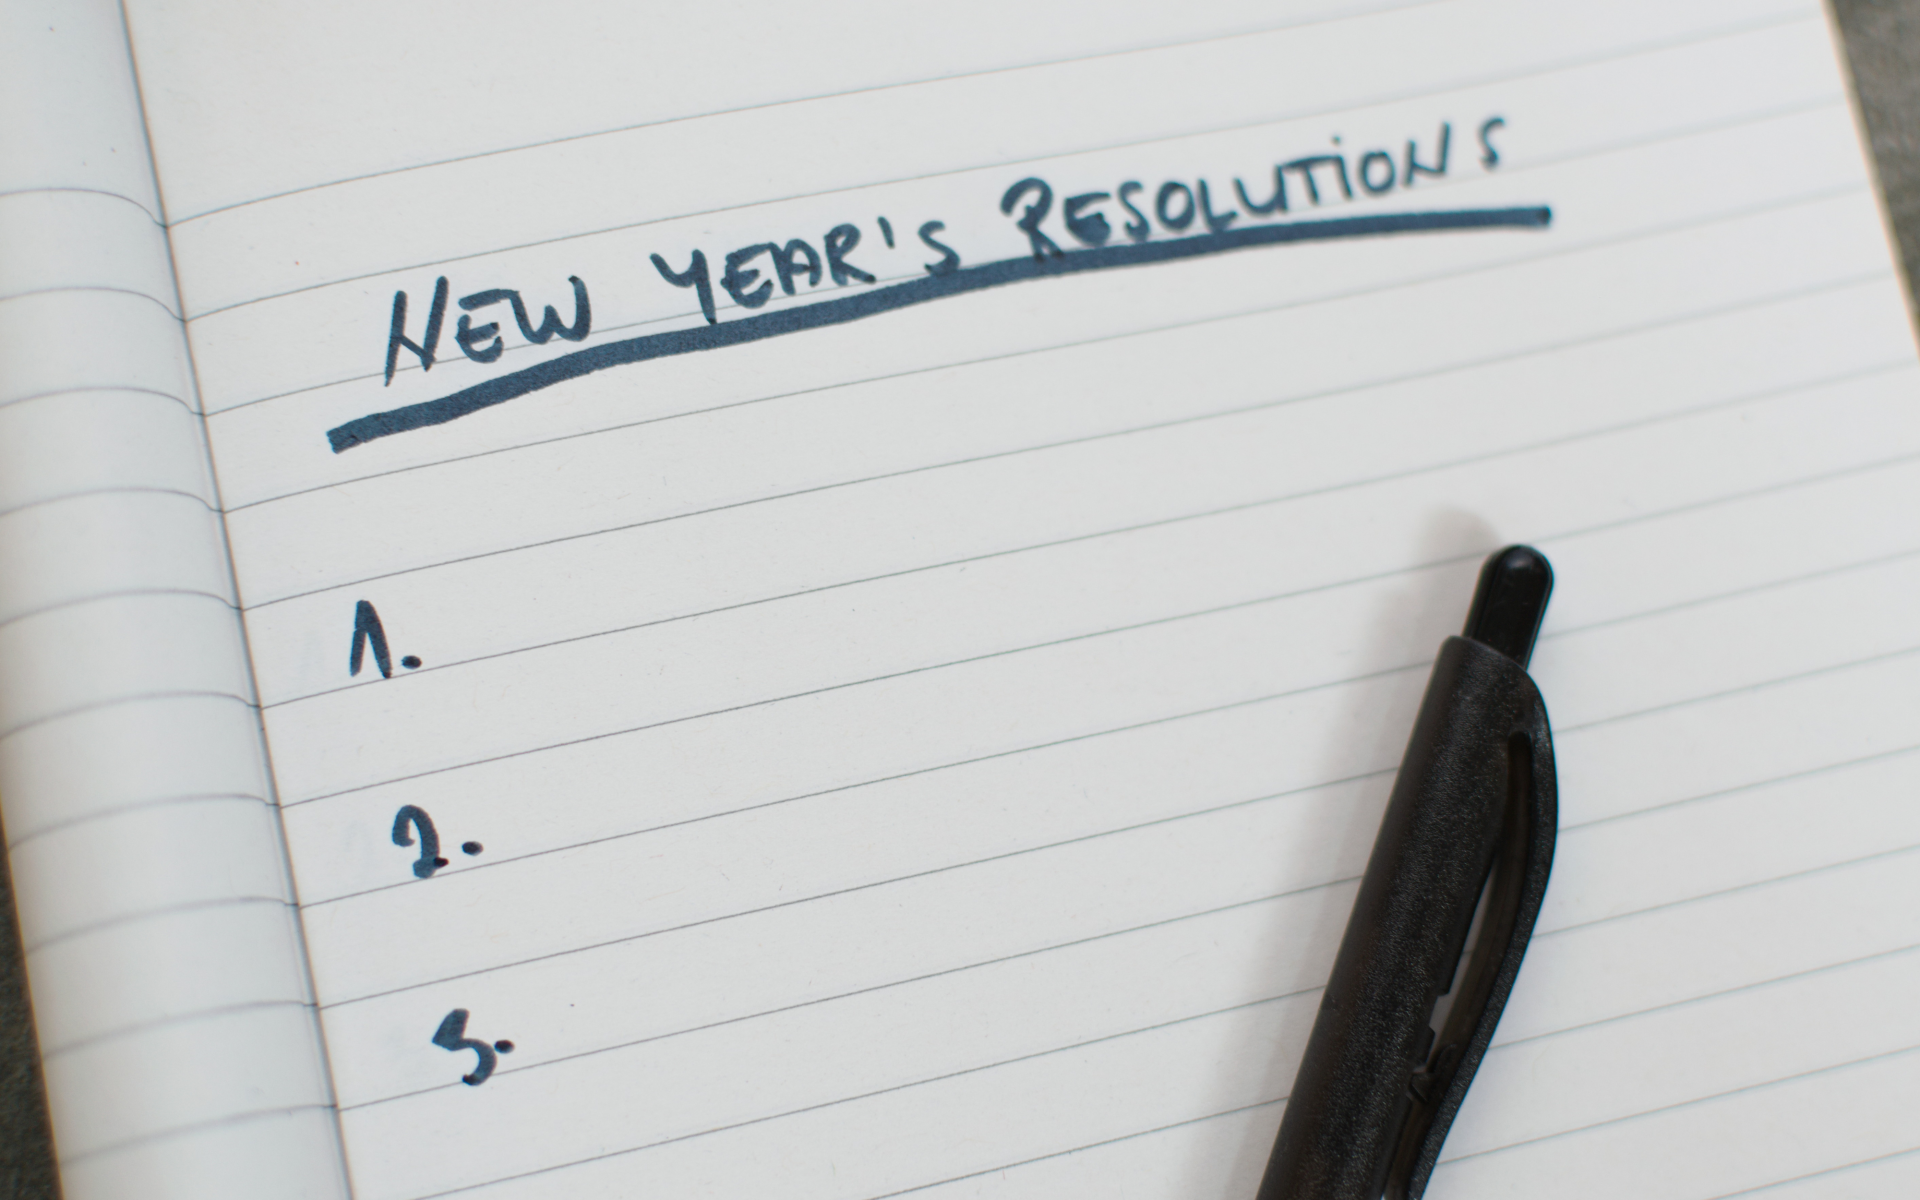 Piece of paper that says New Year's Resolutions at the top with a blank list underneath